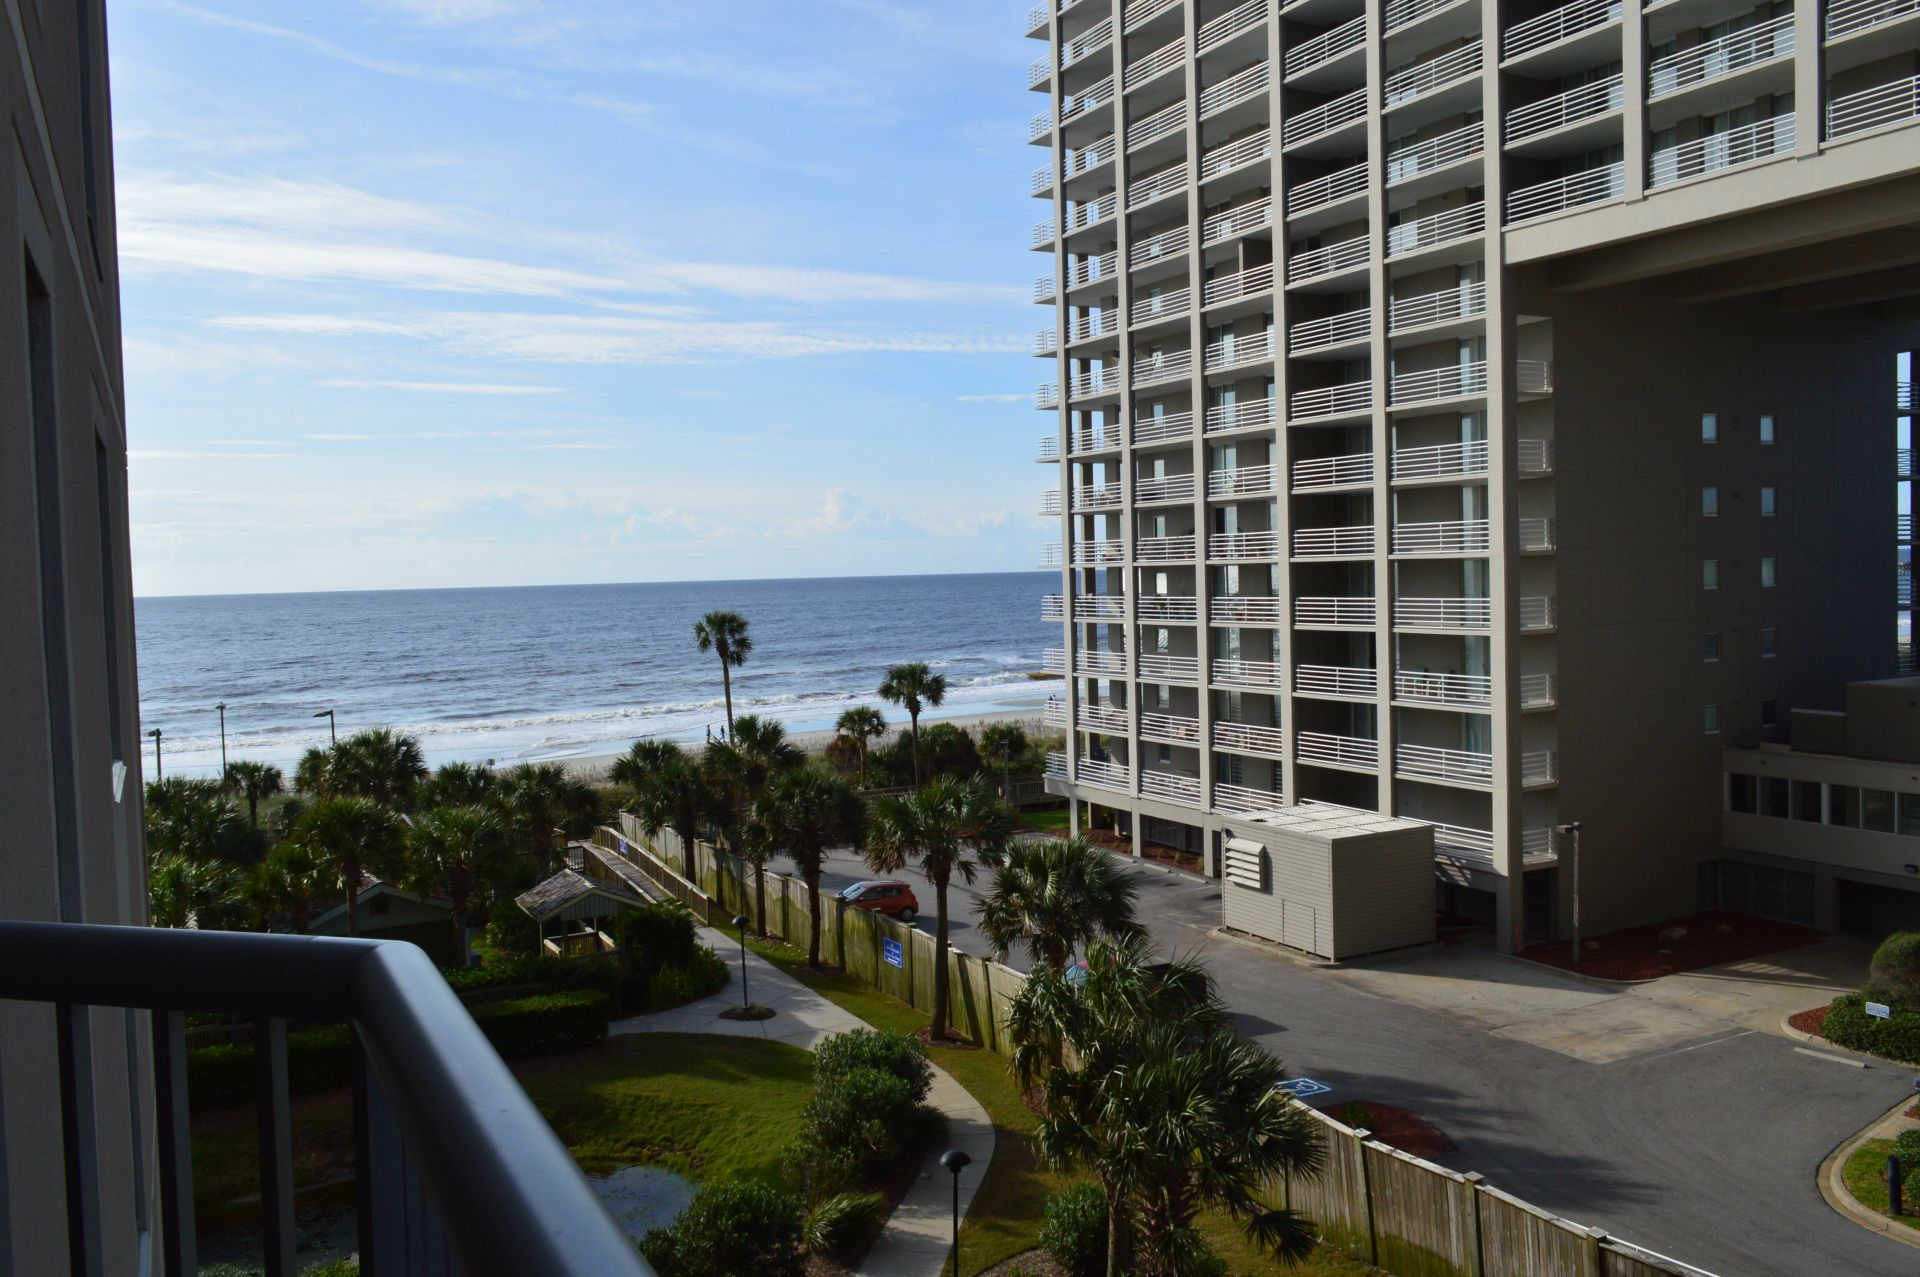 Hilton Myrtle Beach view from balcony